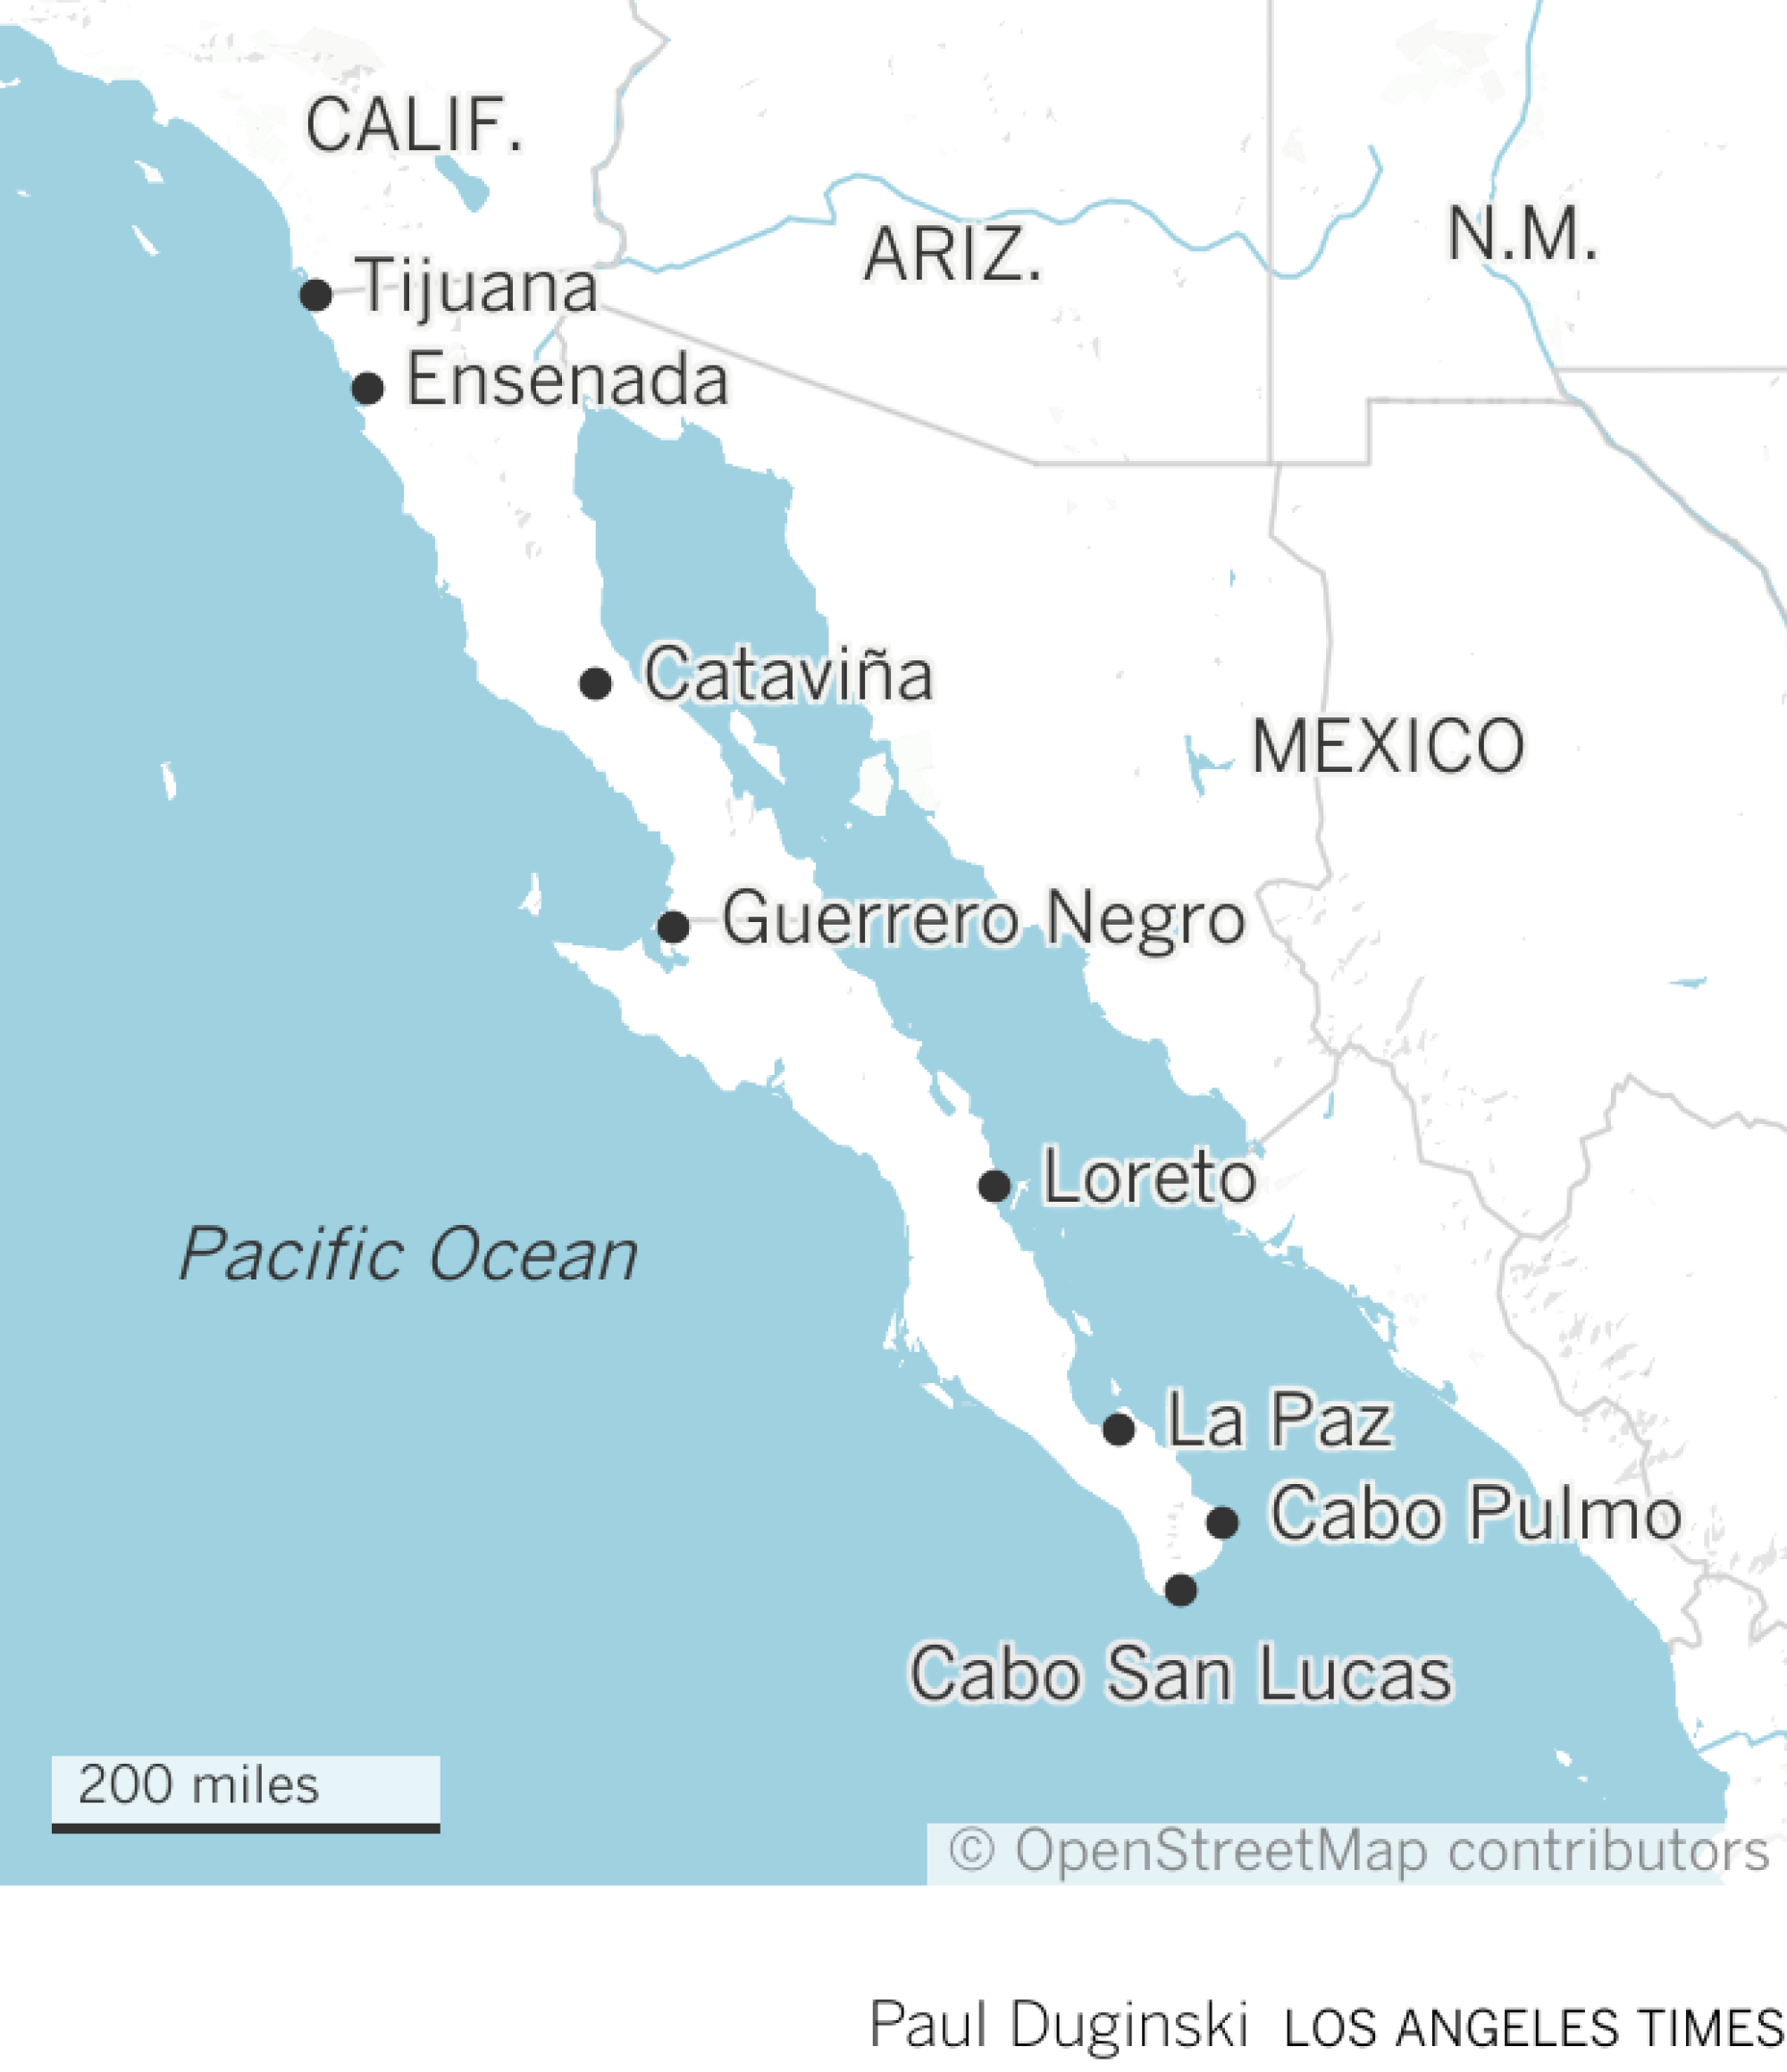 Locator map of towns in Baja California, Mexico.